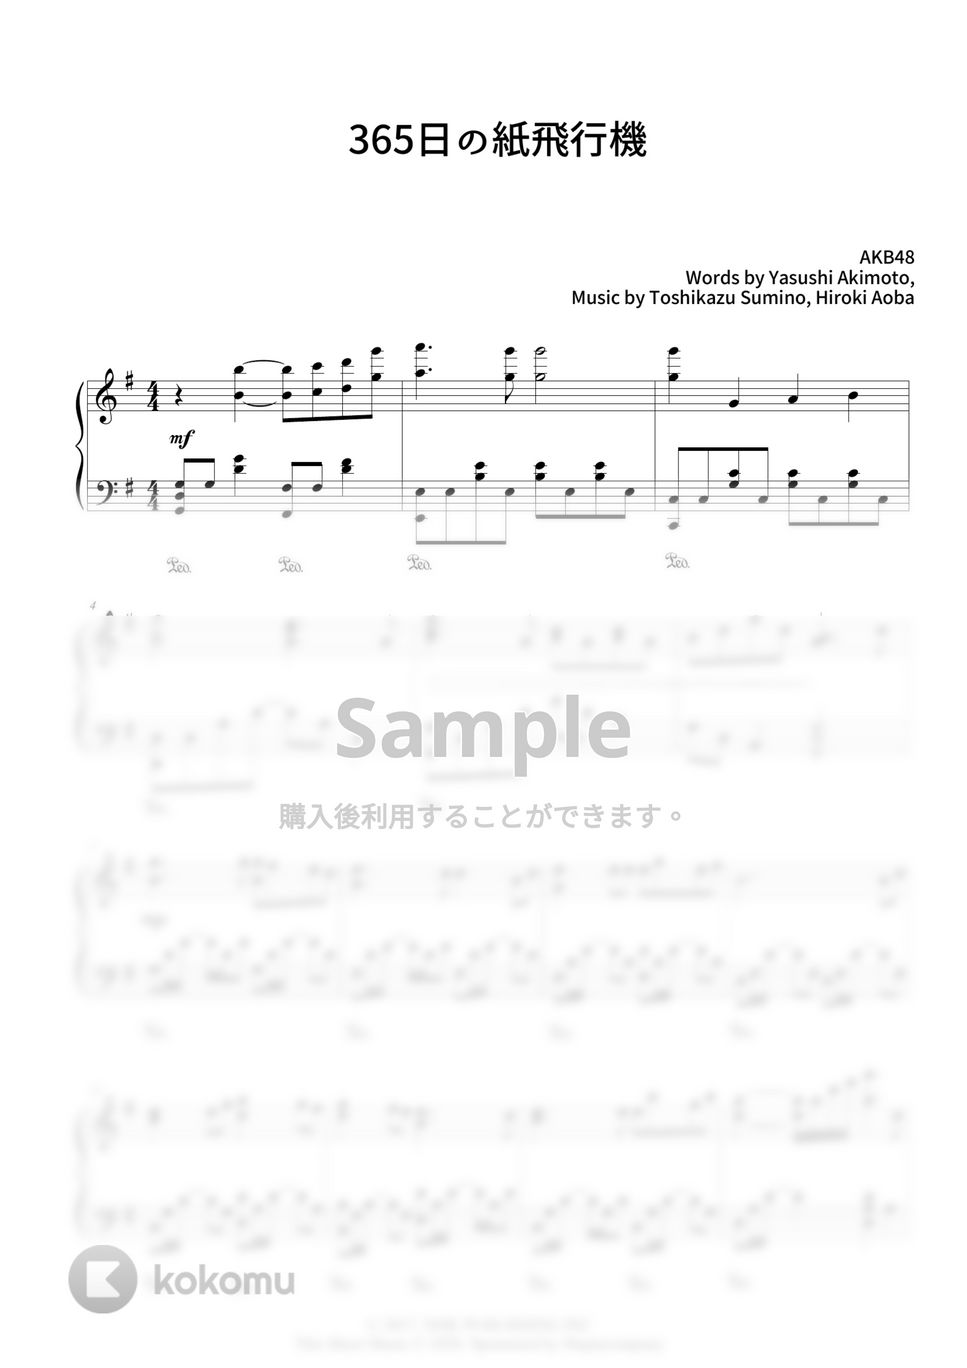 AKB48 - 365日の紙飛行機 by CANACANA family